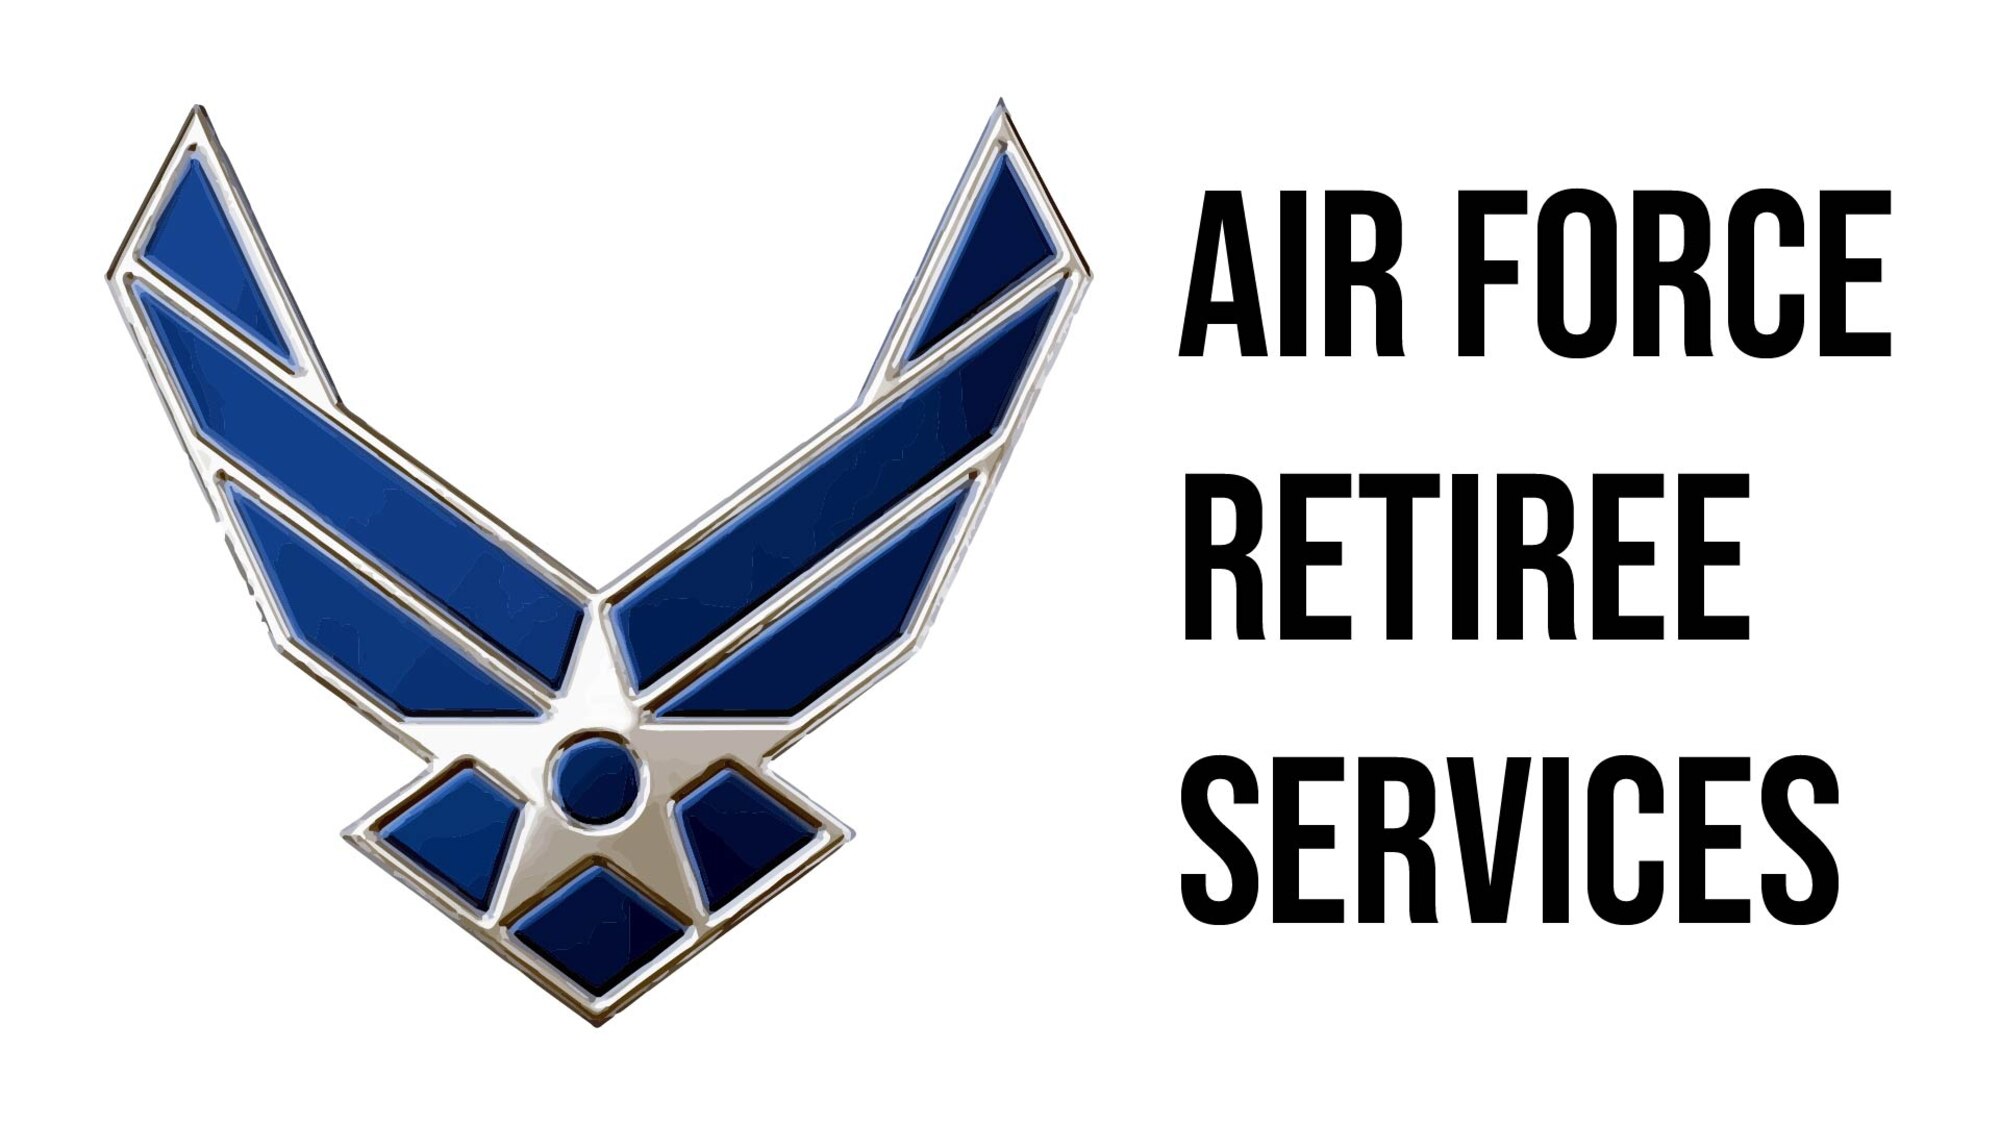 air force logo and text